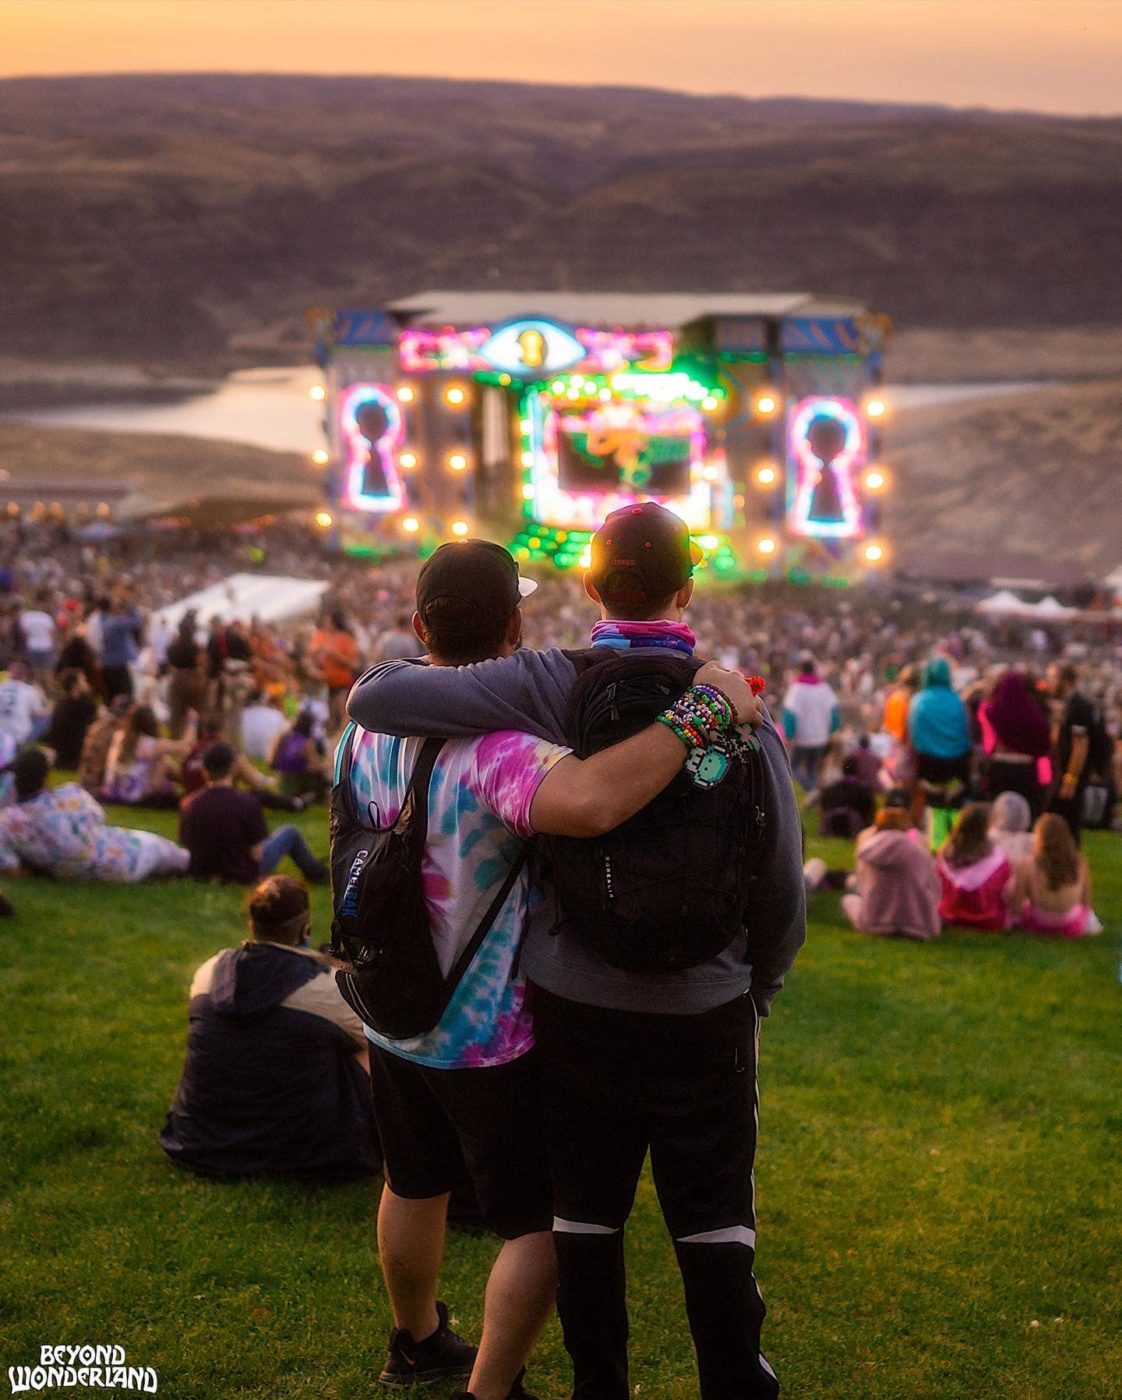 Two people looking down a crowded hill to a brightly lit stage, with a river and mountains behind it.